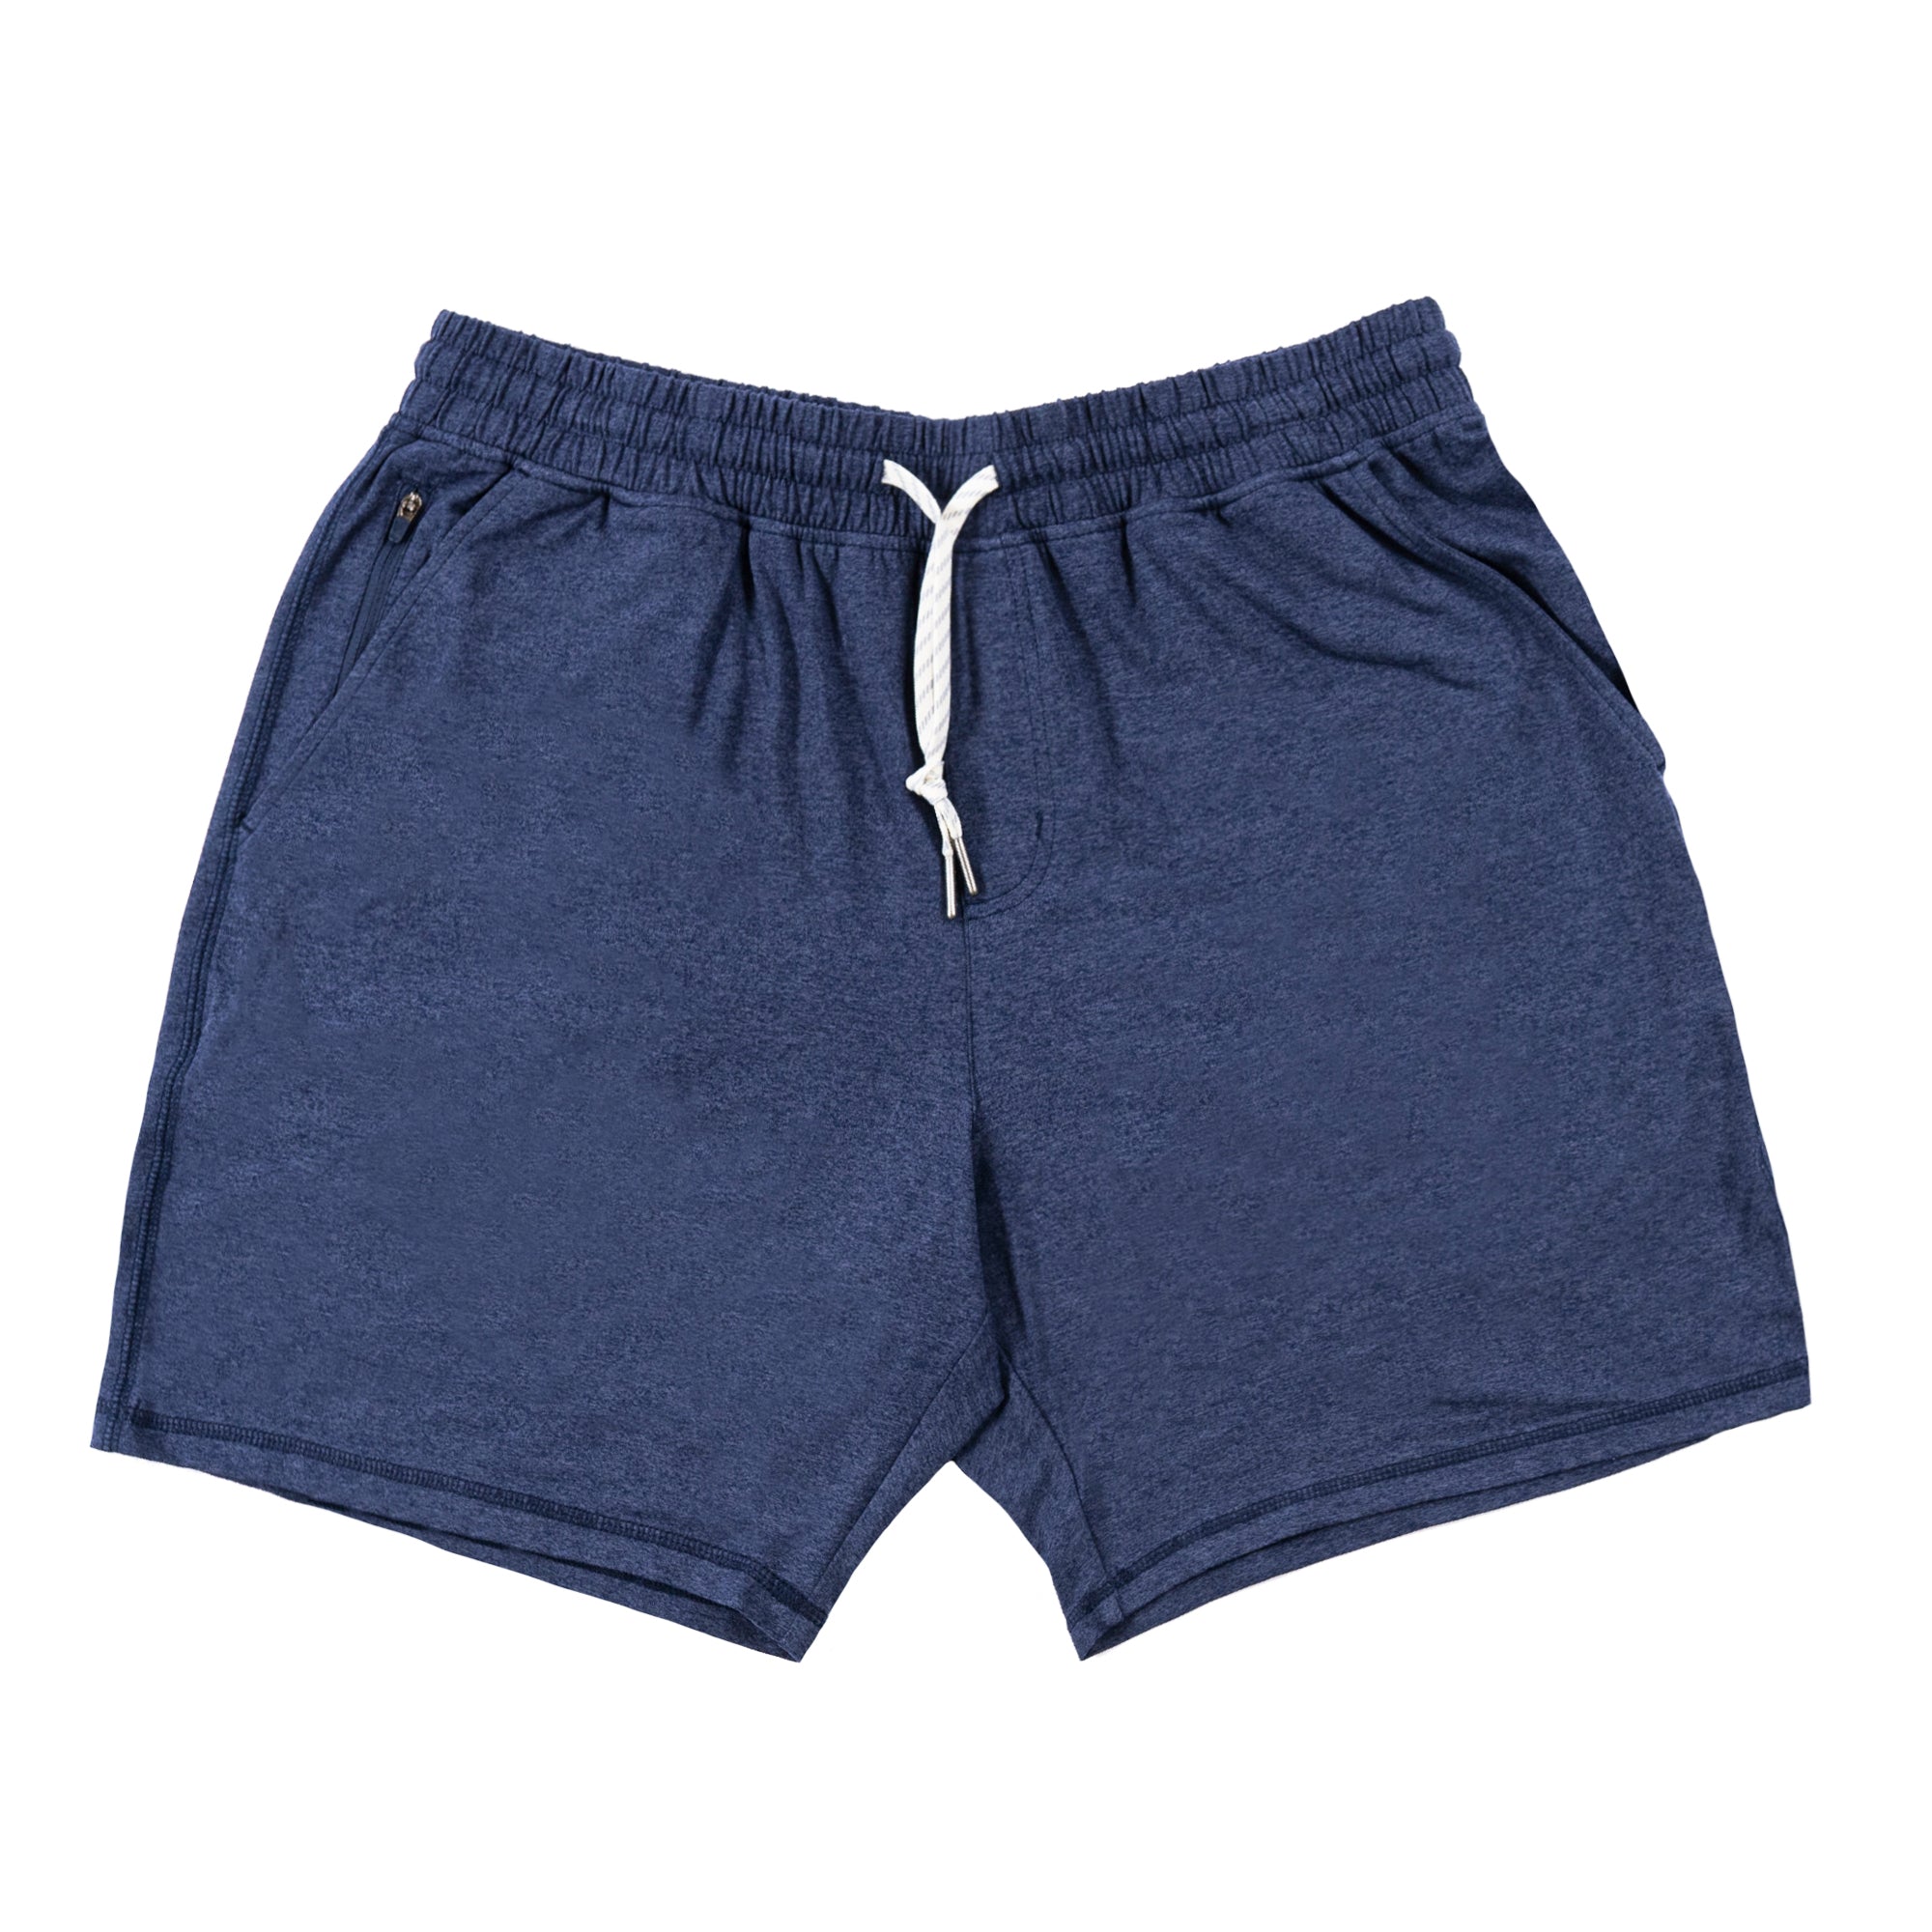 Buy heather-ink-blue MENS DAWN TO DUSK BUTTER SOFT STRETCH SHORT